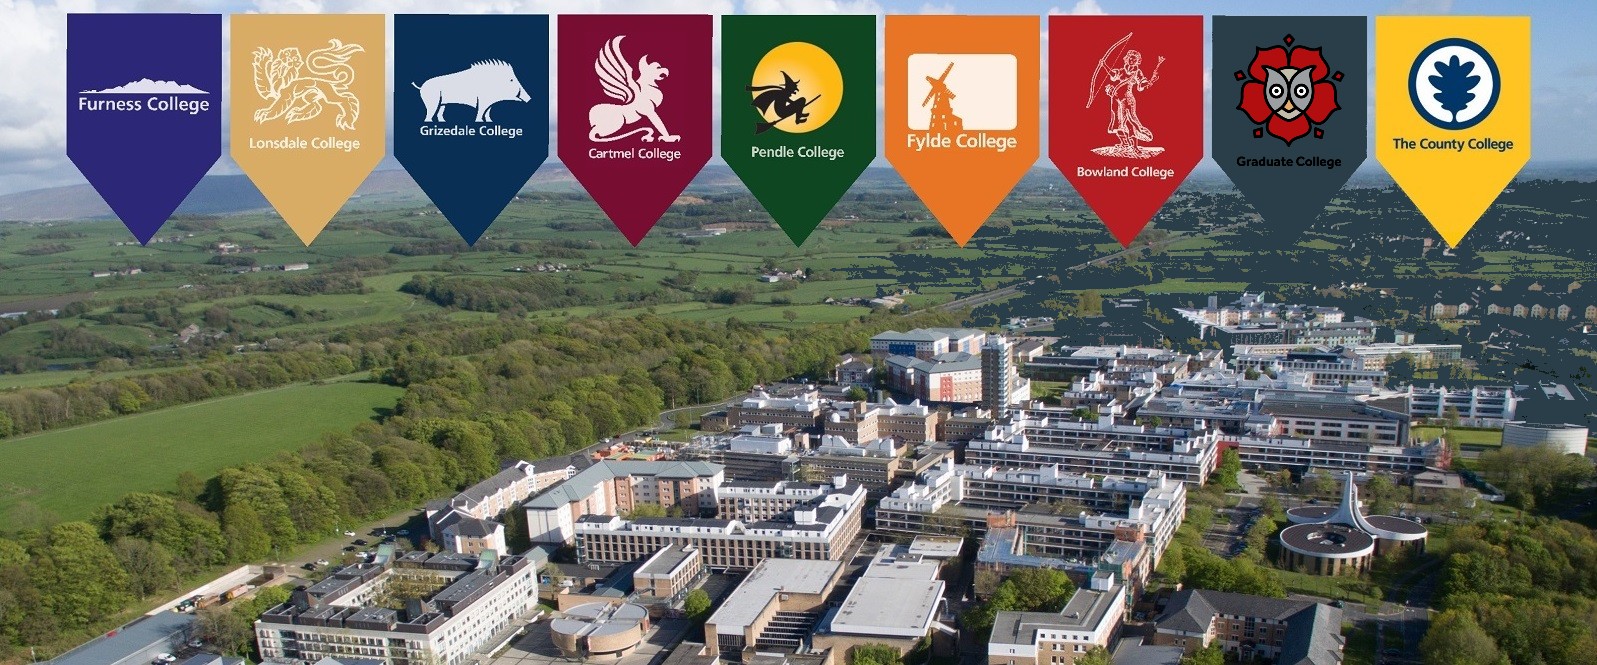 College shields are displayed over an aerial photo of the campus.